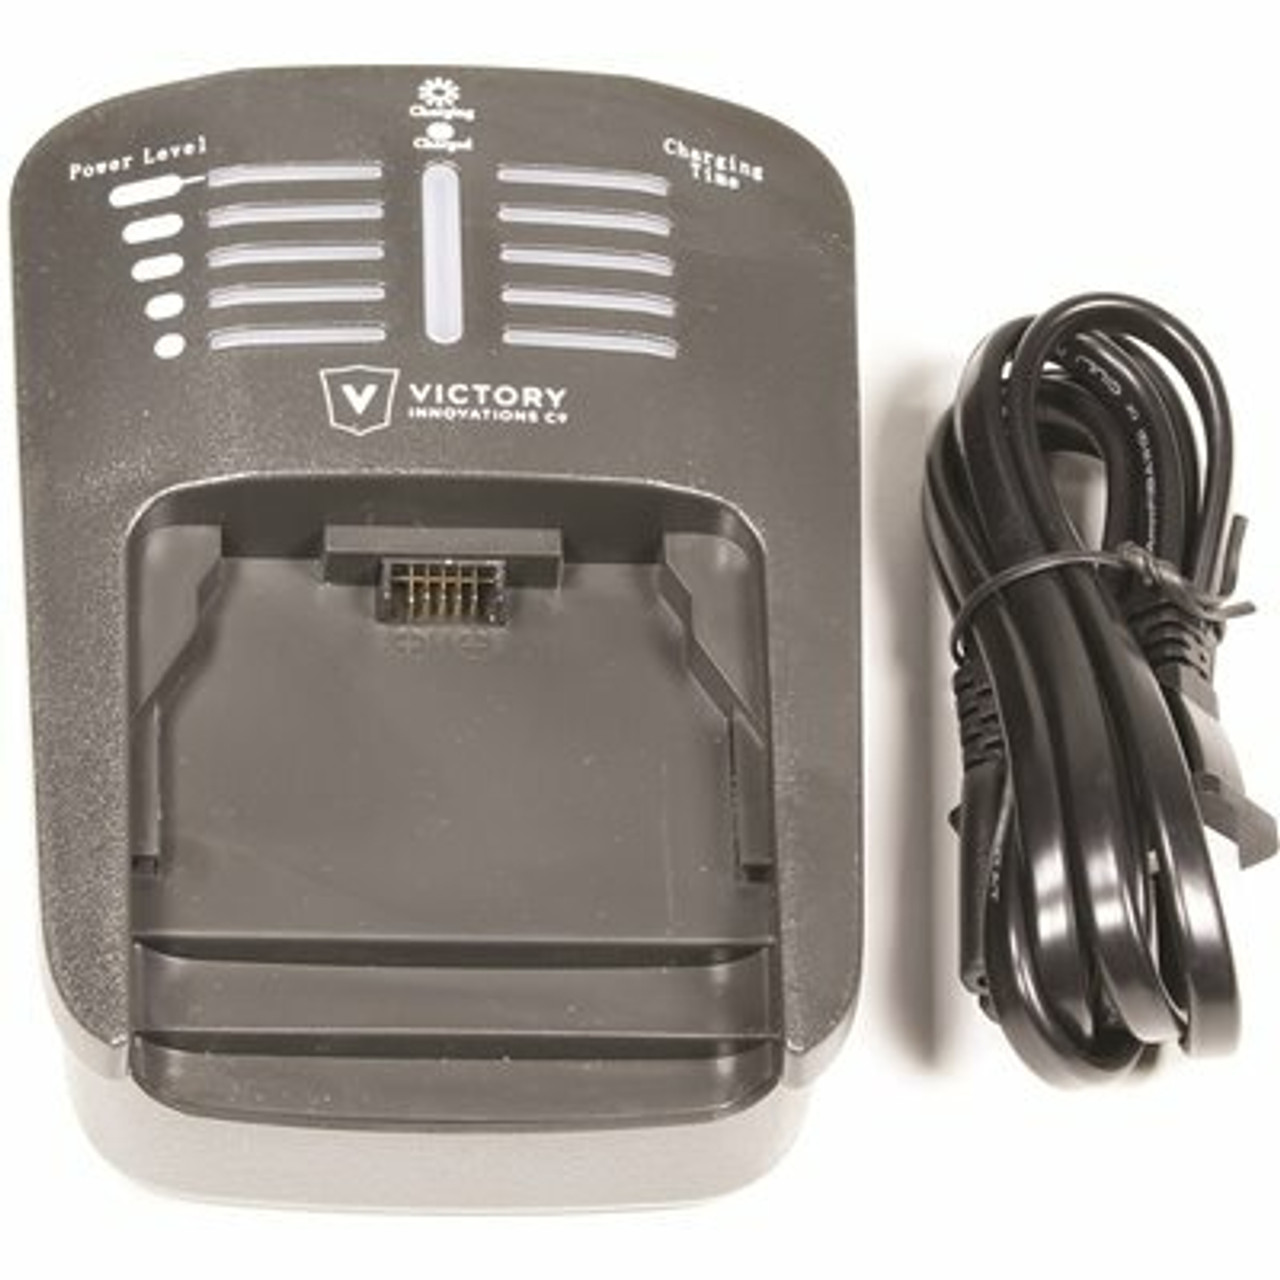 Victory 16.8-Volt Professional Charger